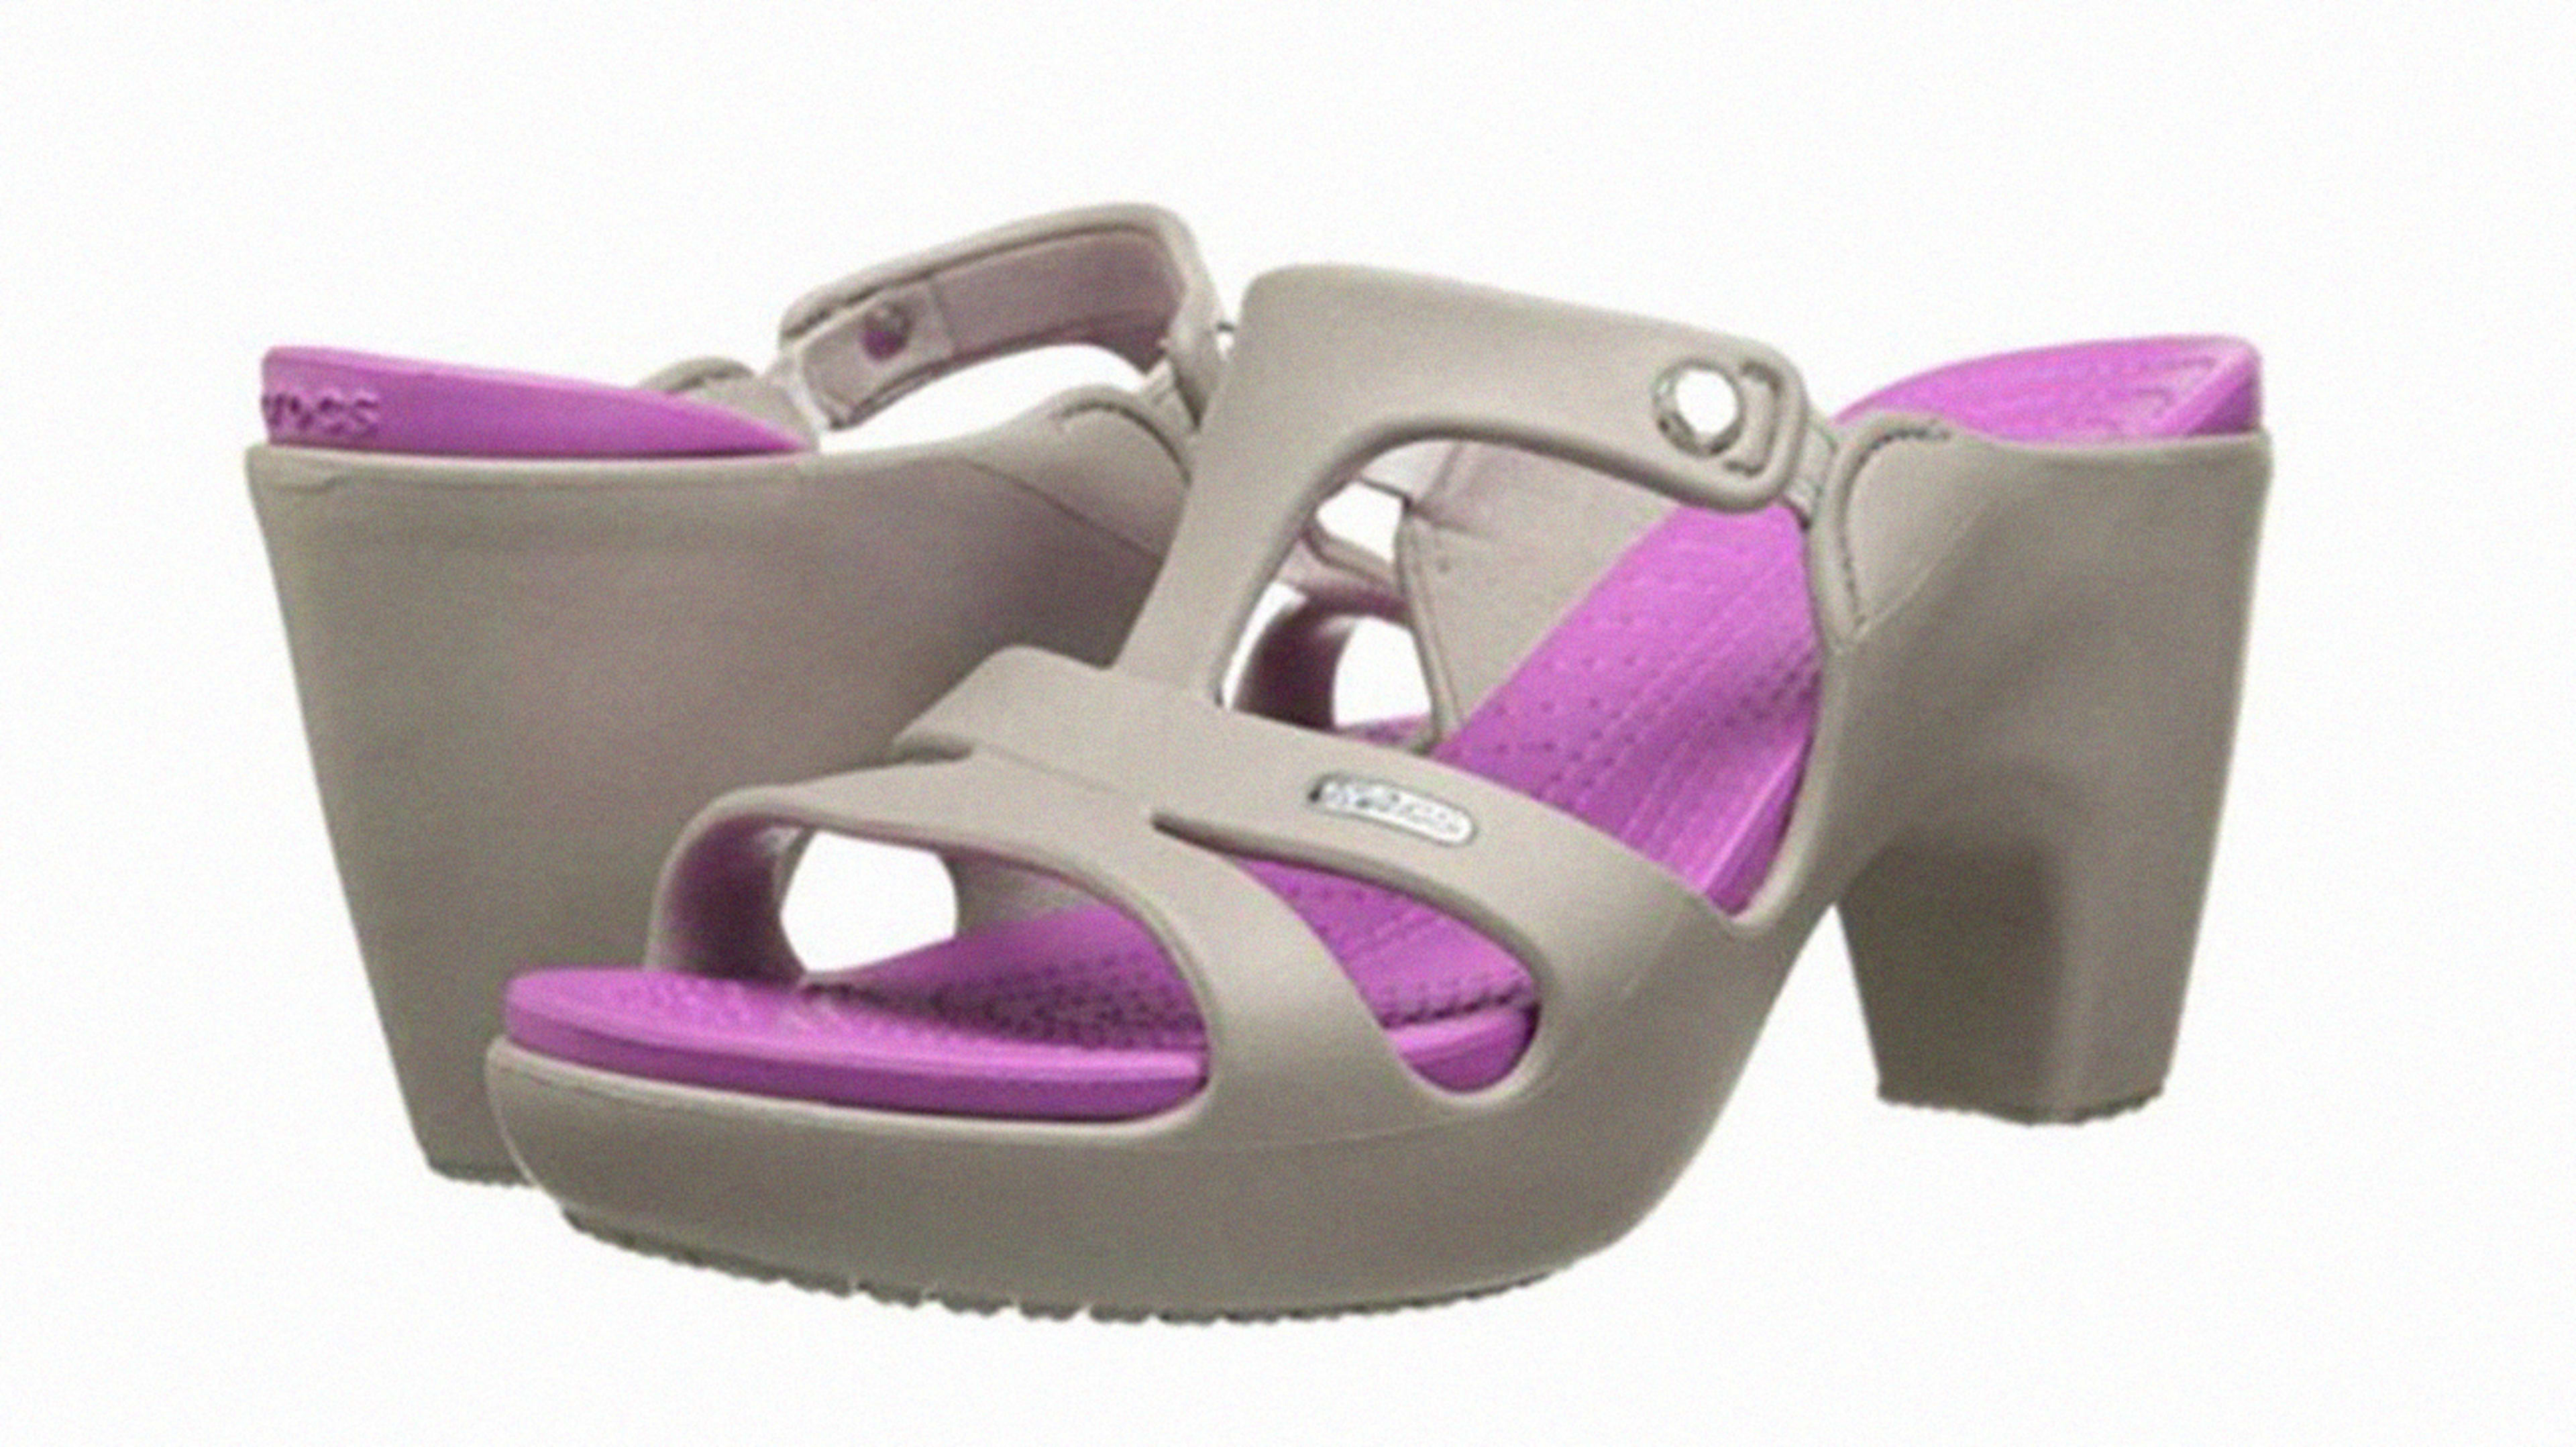 Crocs introduces high-heeled clogs—but why though?